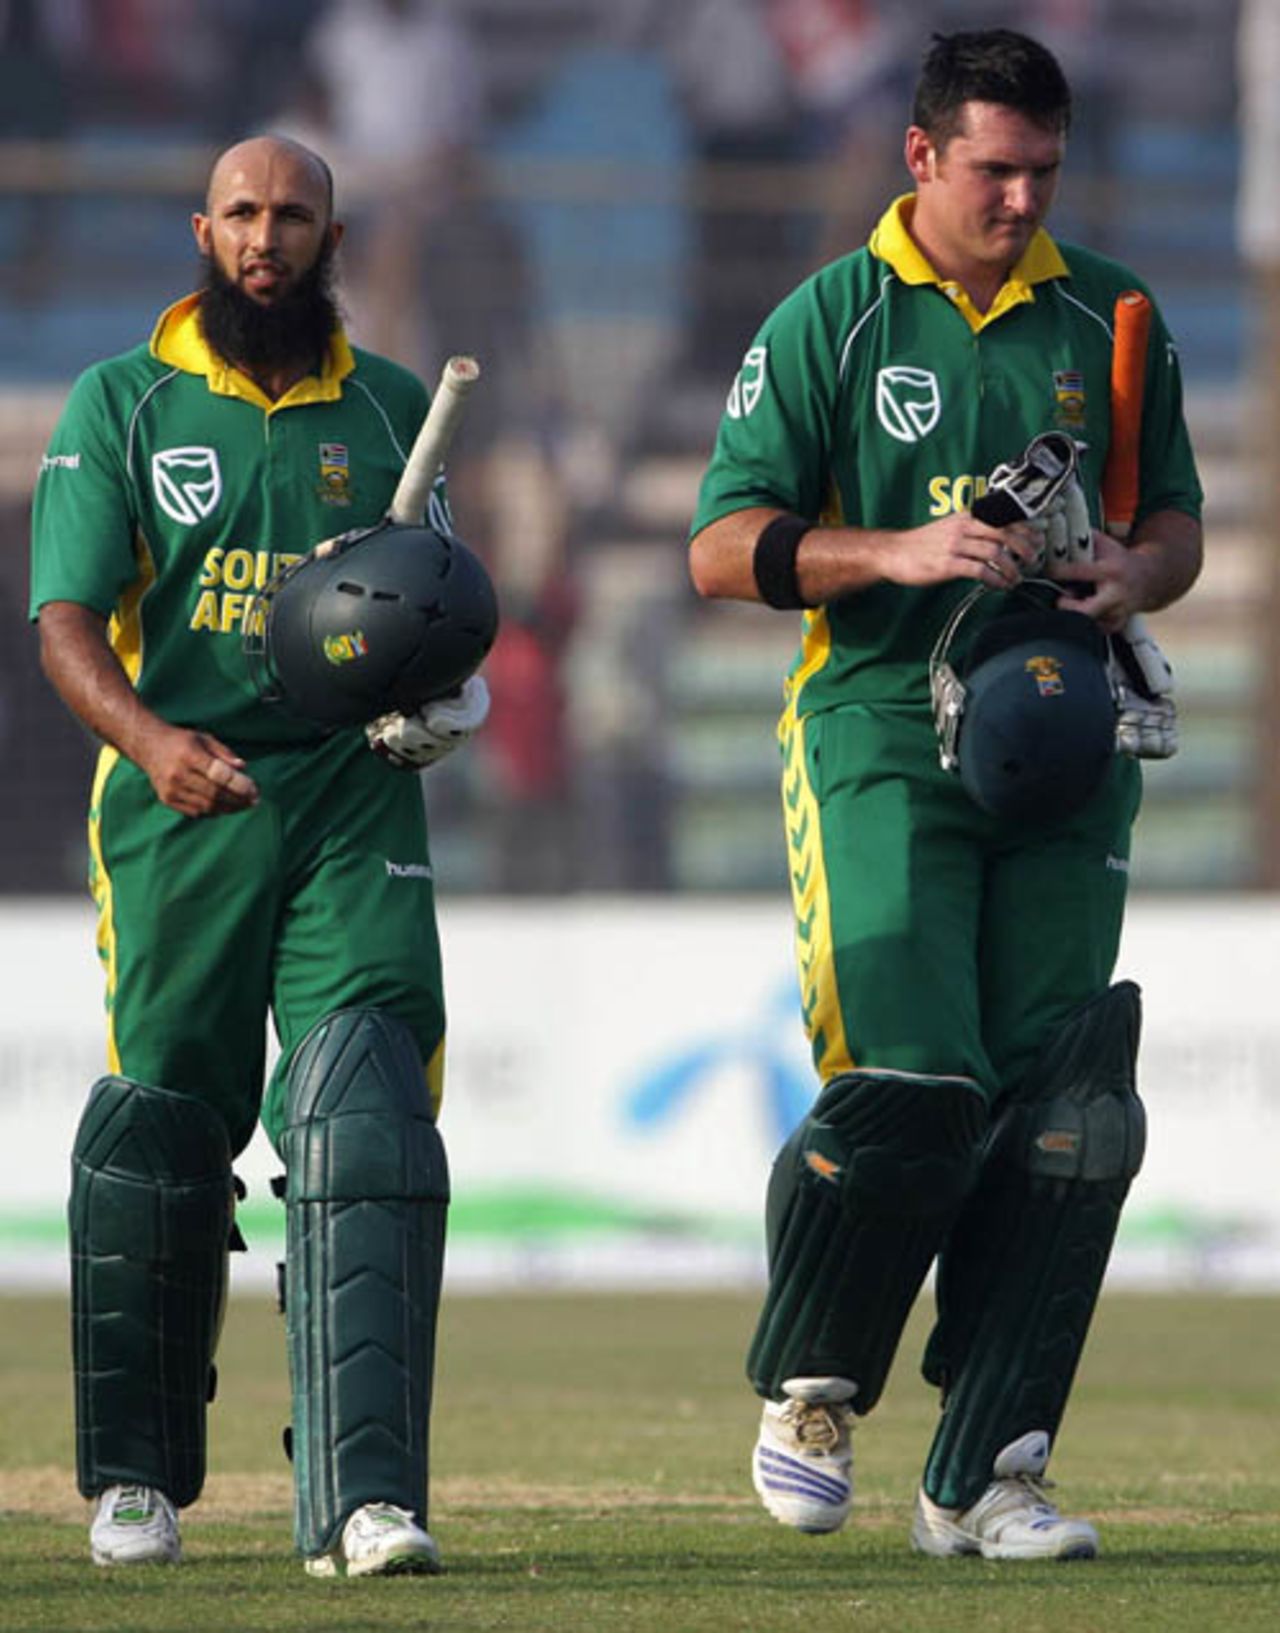 Hashim Amla and Graeme Smith leave the field after sealing the win, Bangladesh v South Africa, 1st ODI, Chittagong, March 9, 2008